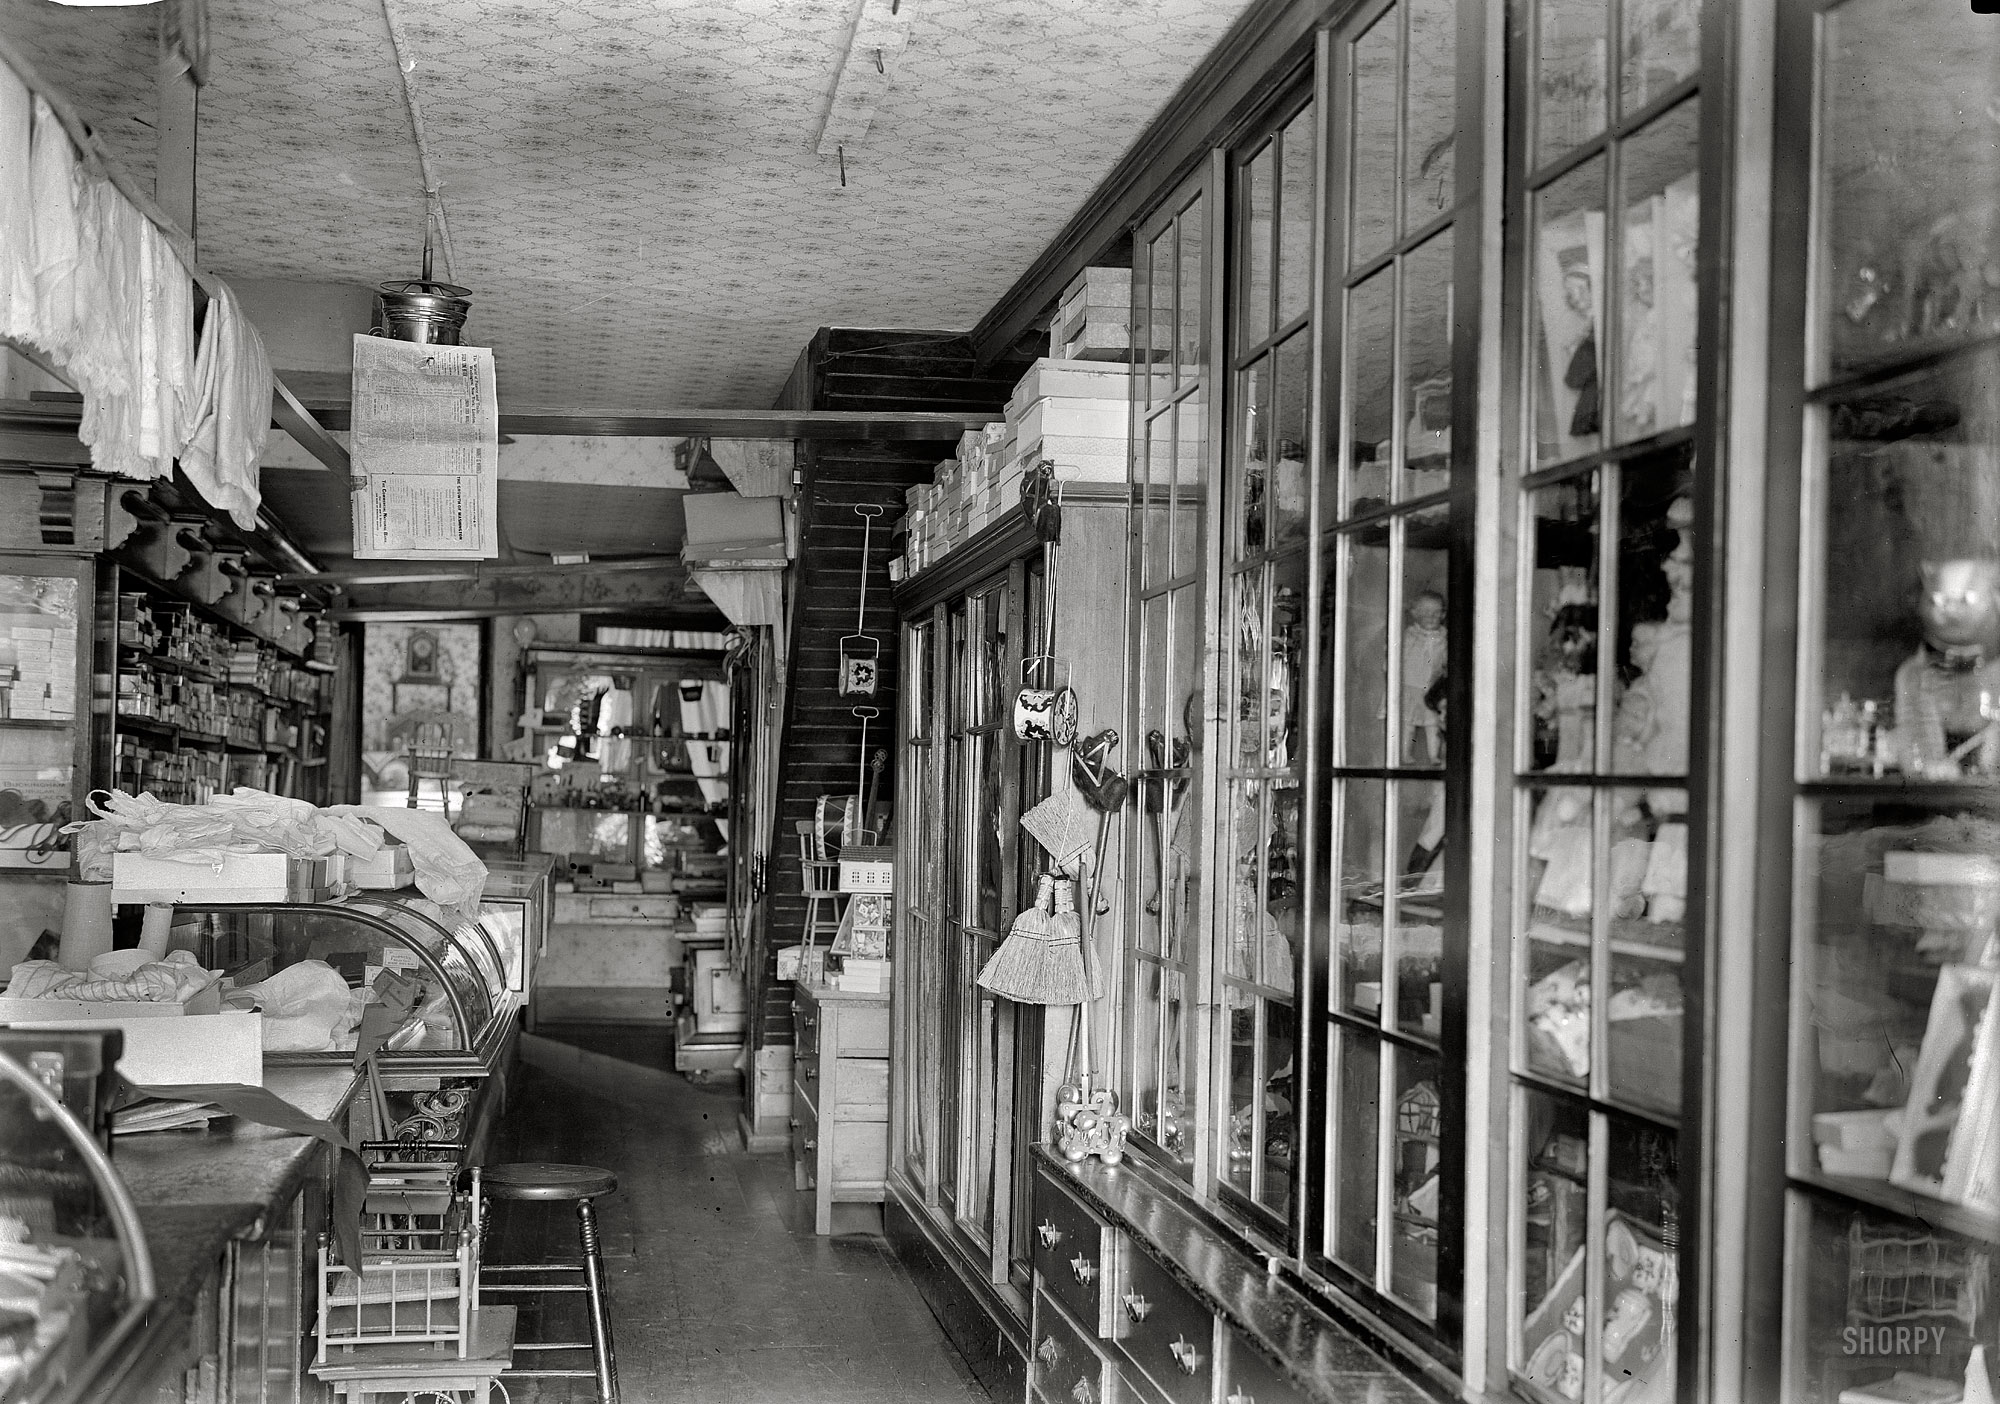 And Lincoln, too. Interior of the Apolonia Stuntz toy store on New York Avenue, seen from the outside in the previous post. View full size.